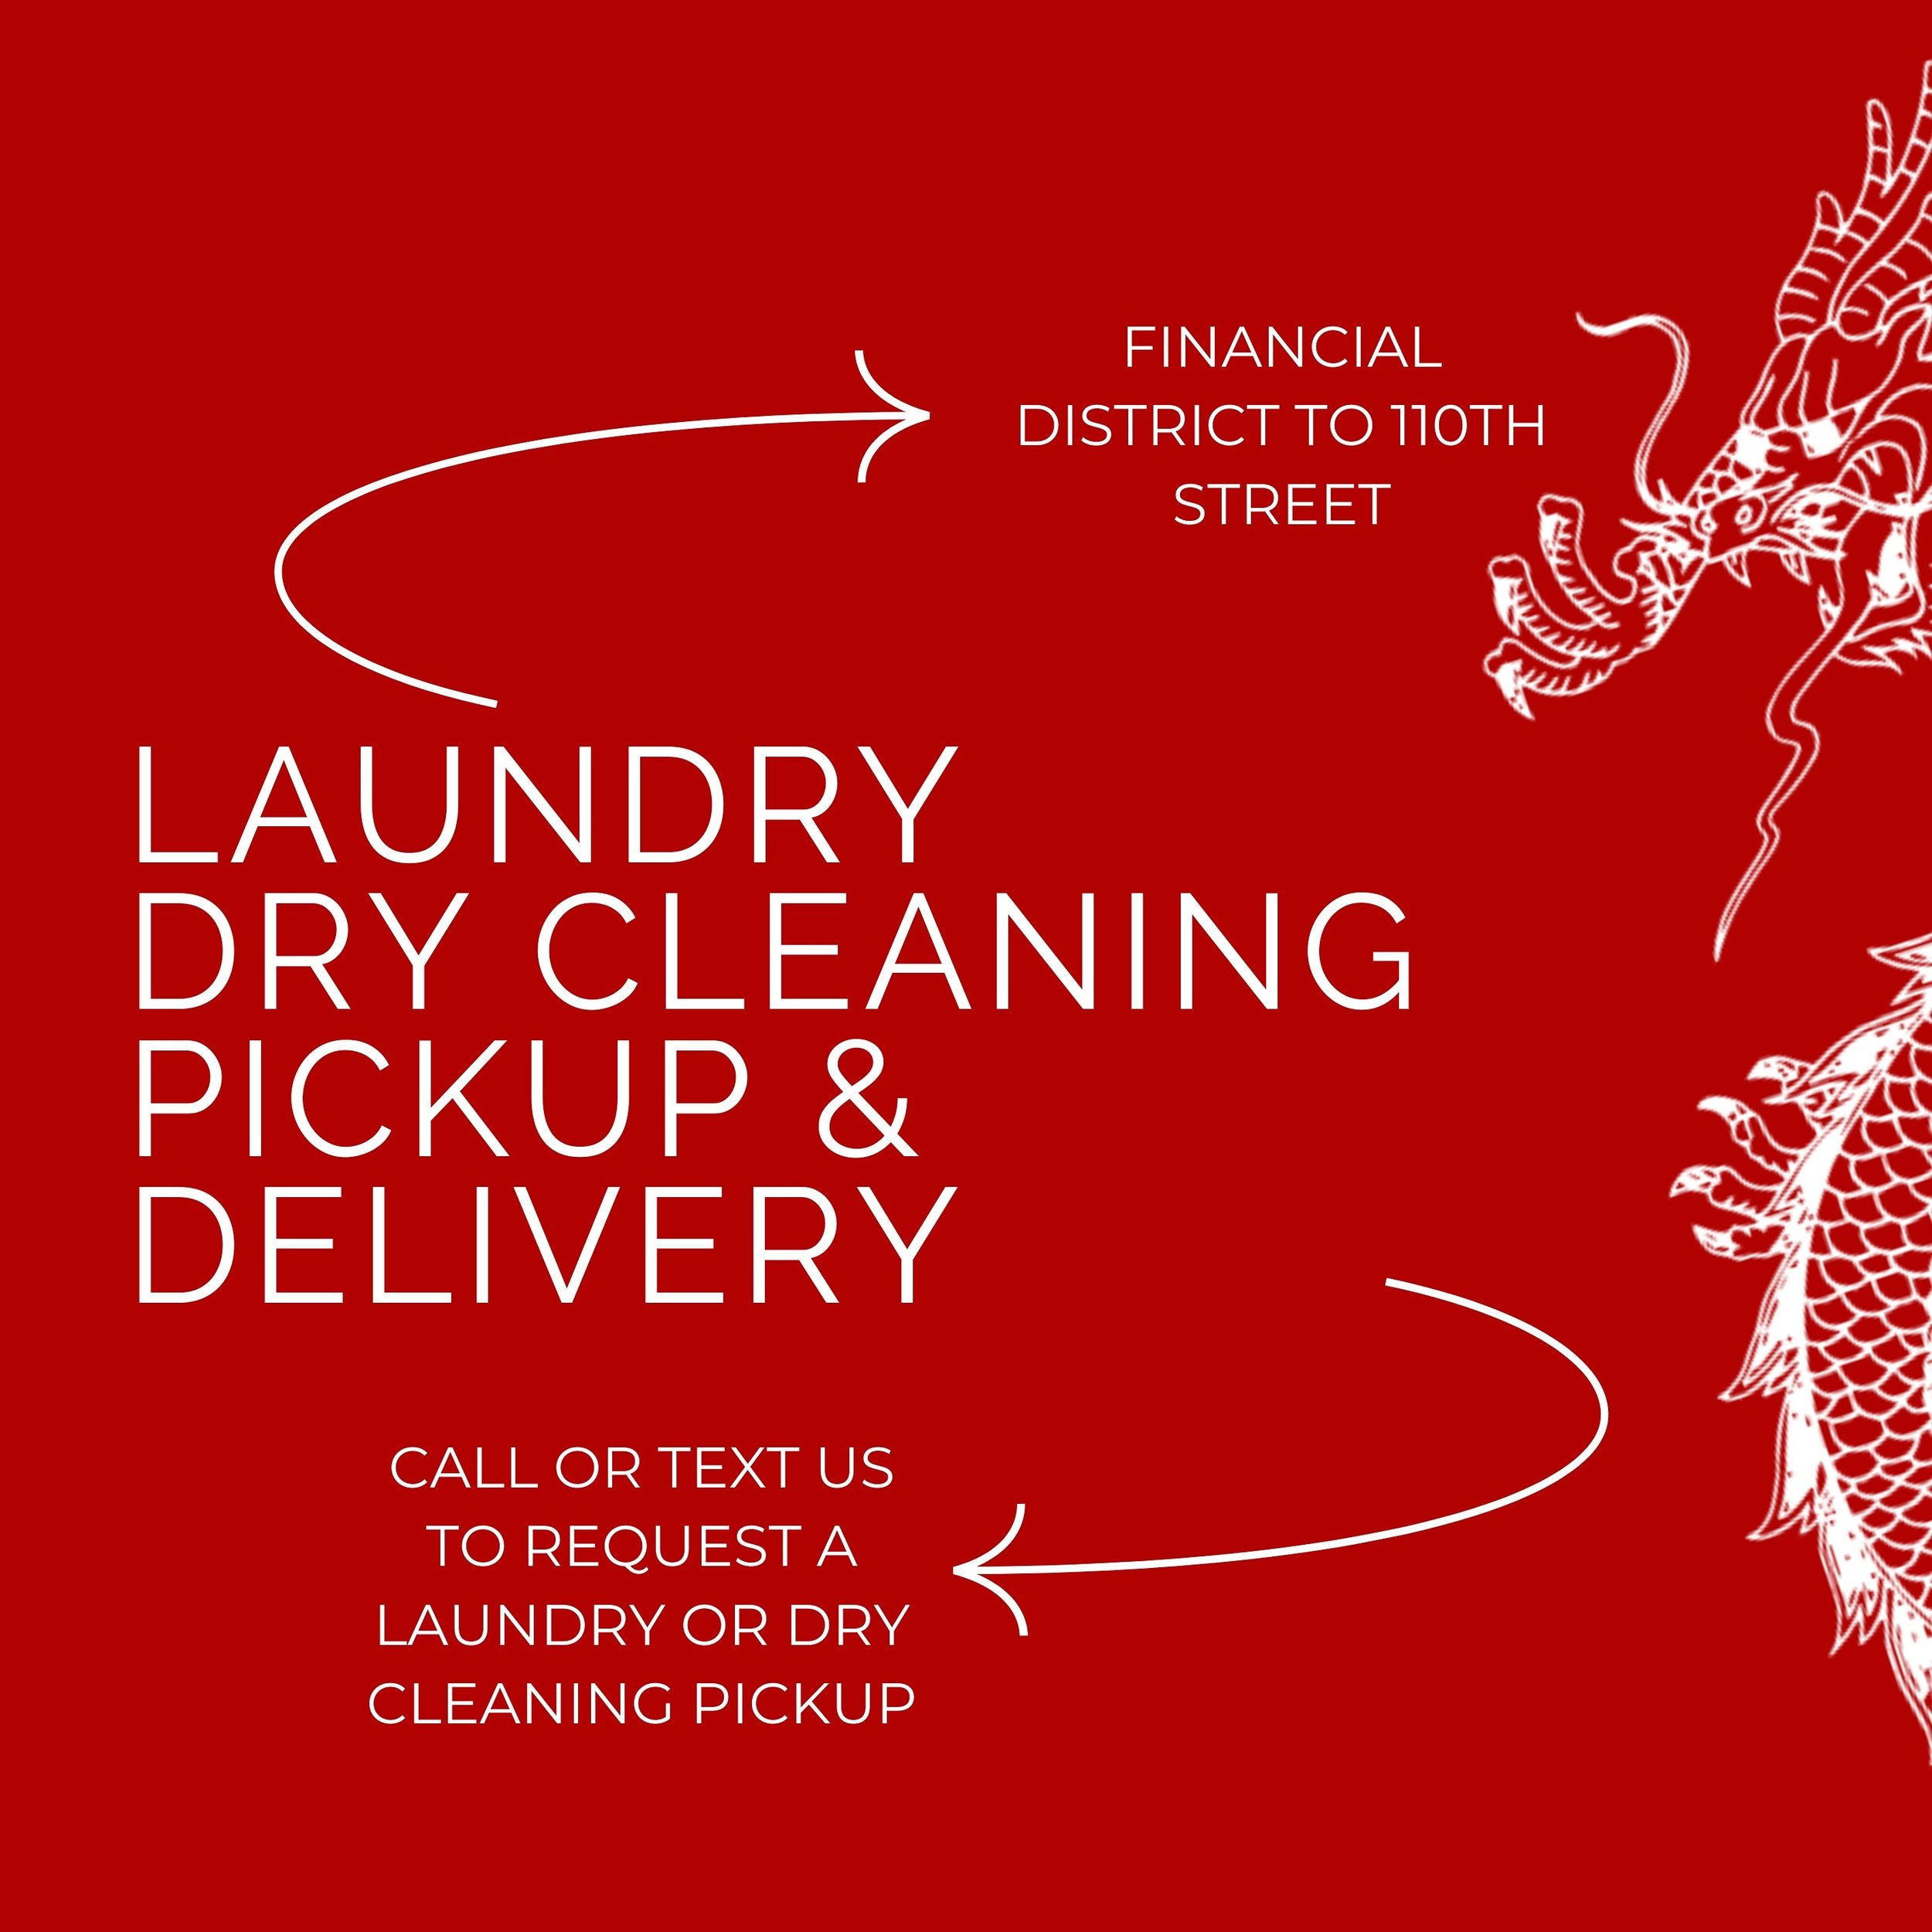 Need pressed linens or your favorite shirts nicely pressed and dry cleaned? Send them to us at Chinese Laundry Inc. 🐉 it&rsquo;s simple, just call or text us to request a laundry or dry cleaning pickup, we pickup and deliver Monday to Saturday 6pm-9